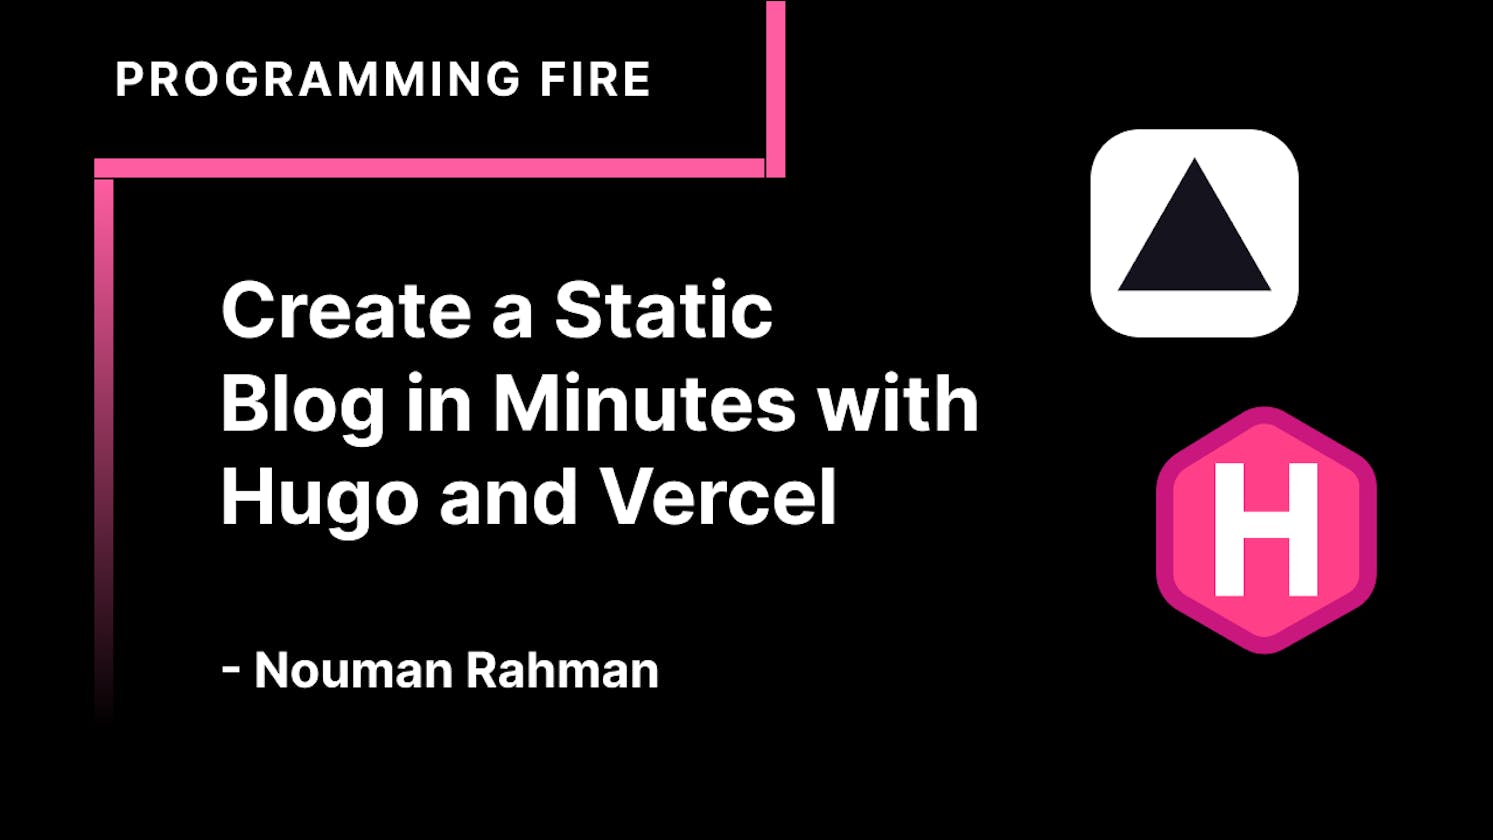 Create a Static Blog in Minutes with Hugo and Vercel